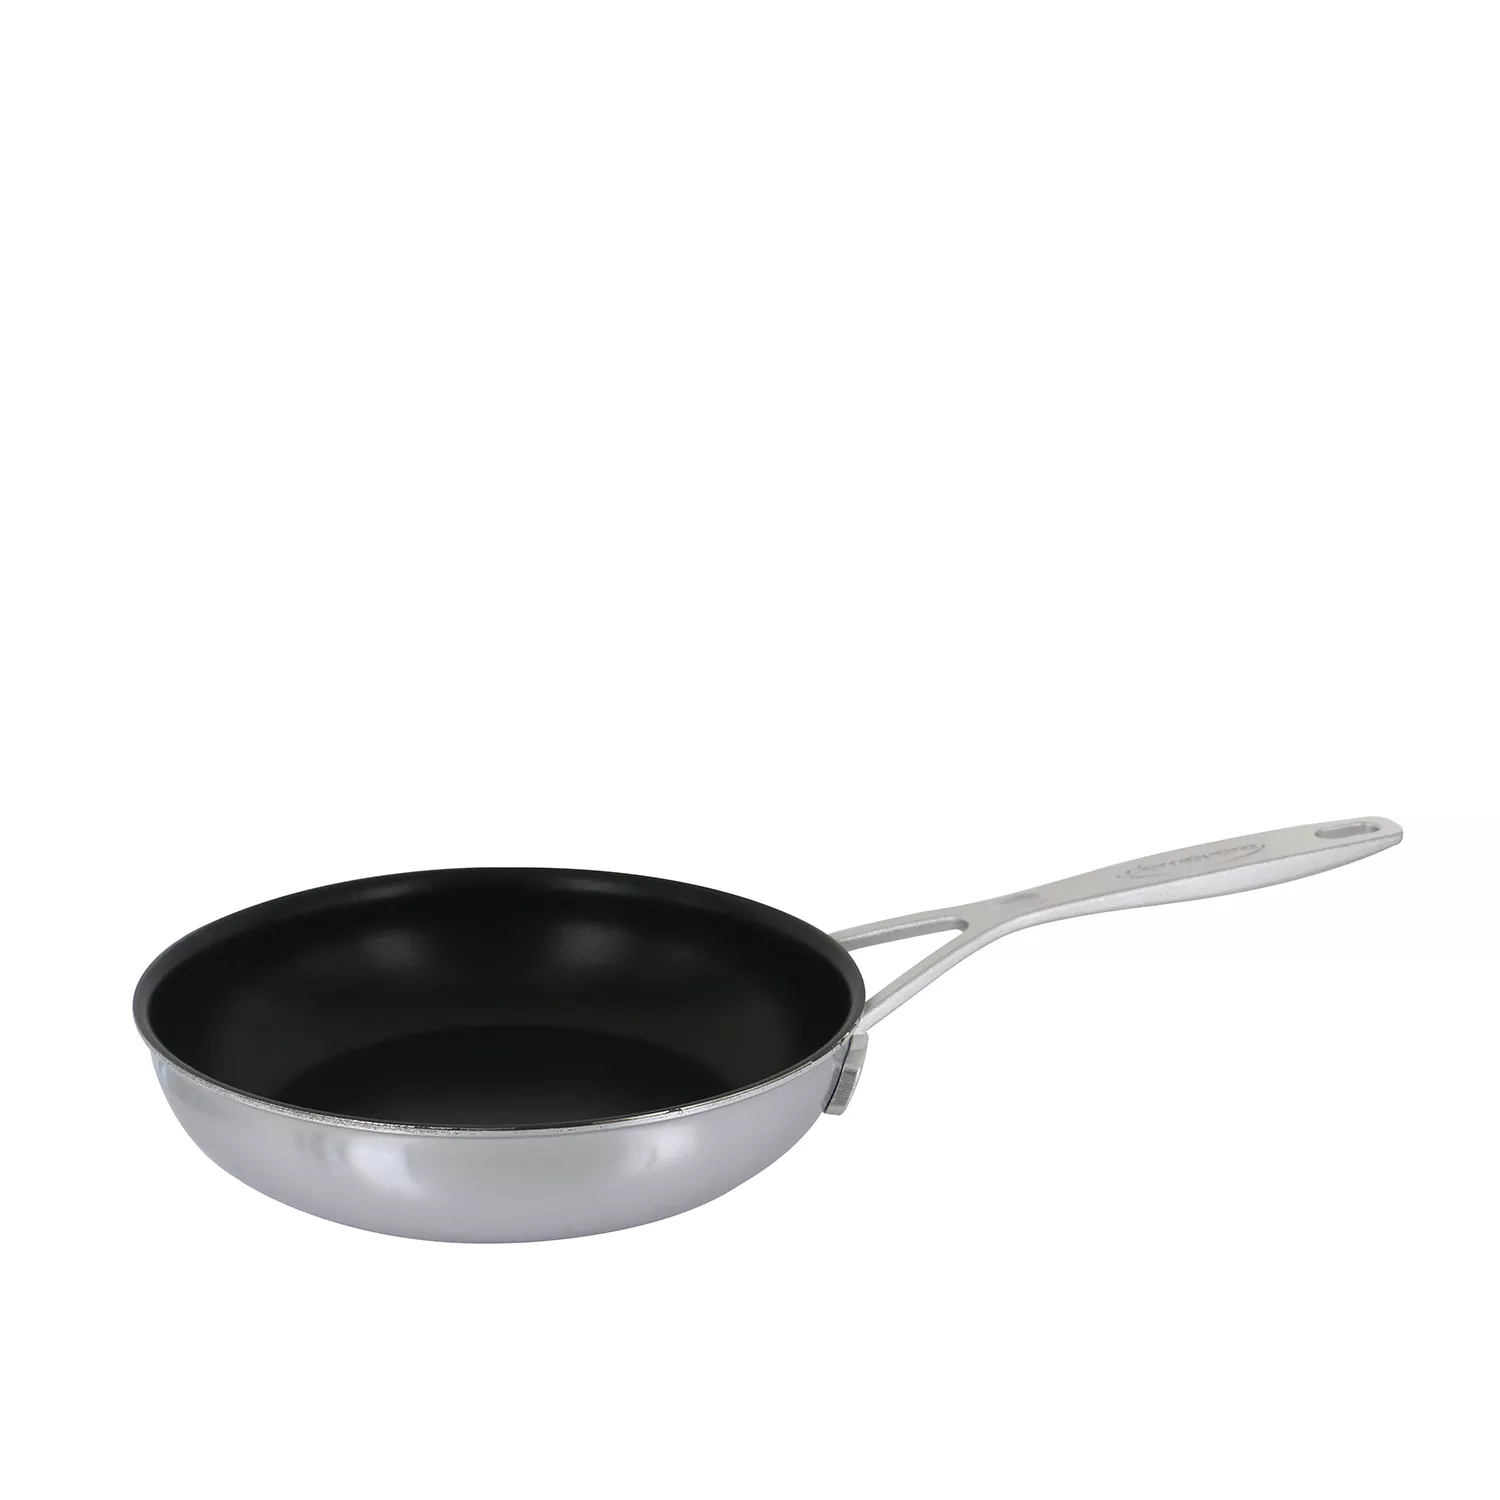 ANEDER Frying Pan with Lid Skillet Nonstick 10 inch Carbon Steel